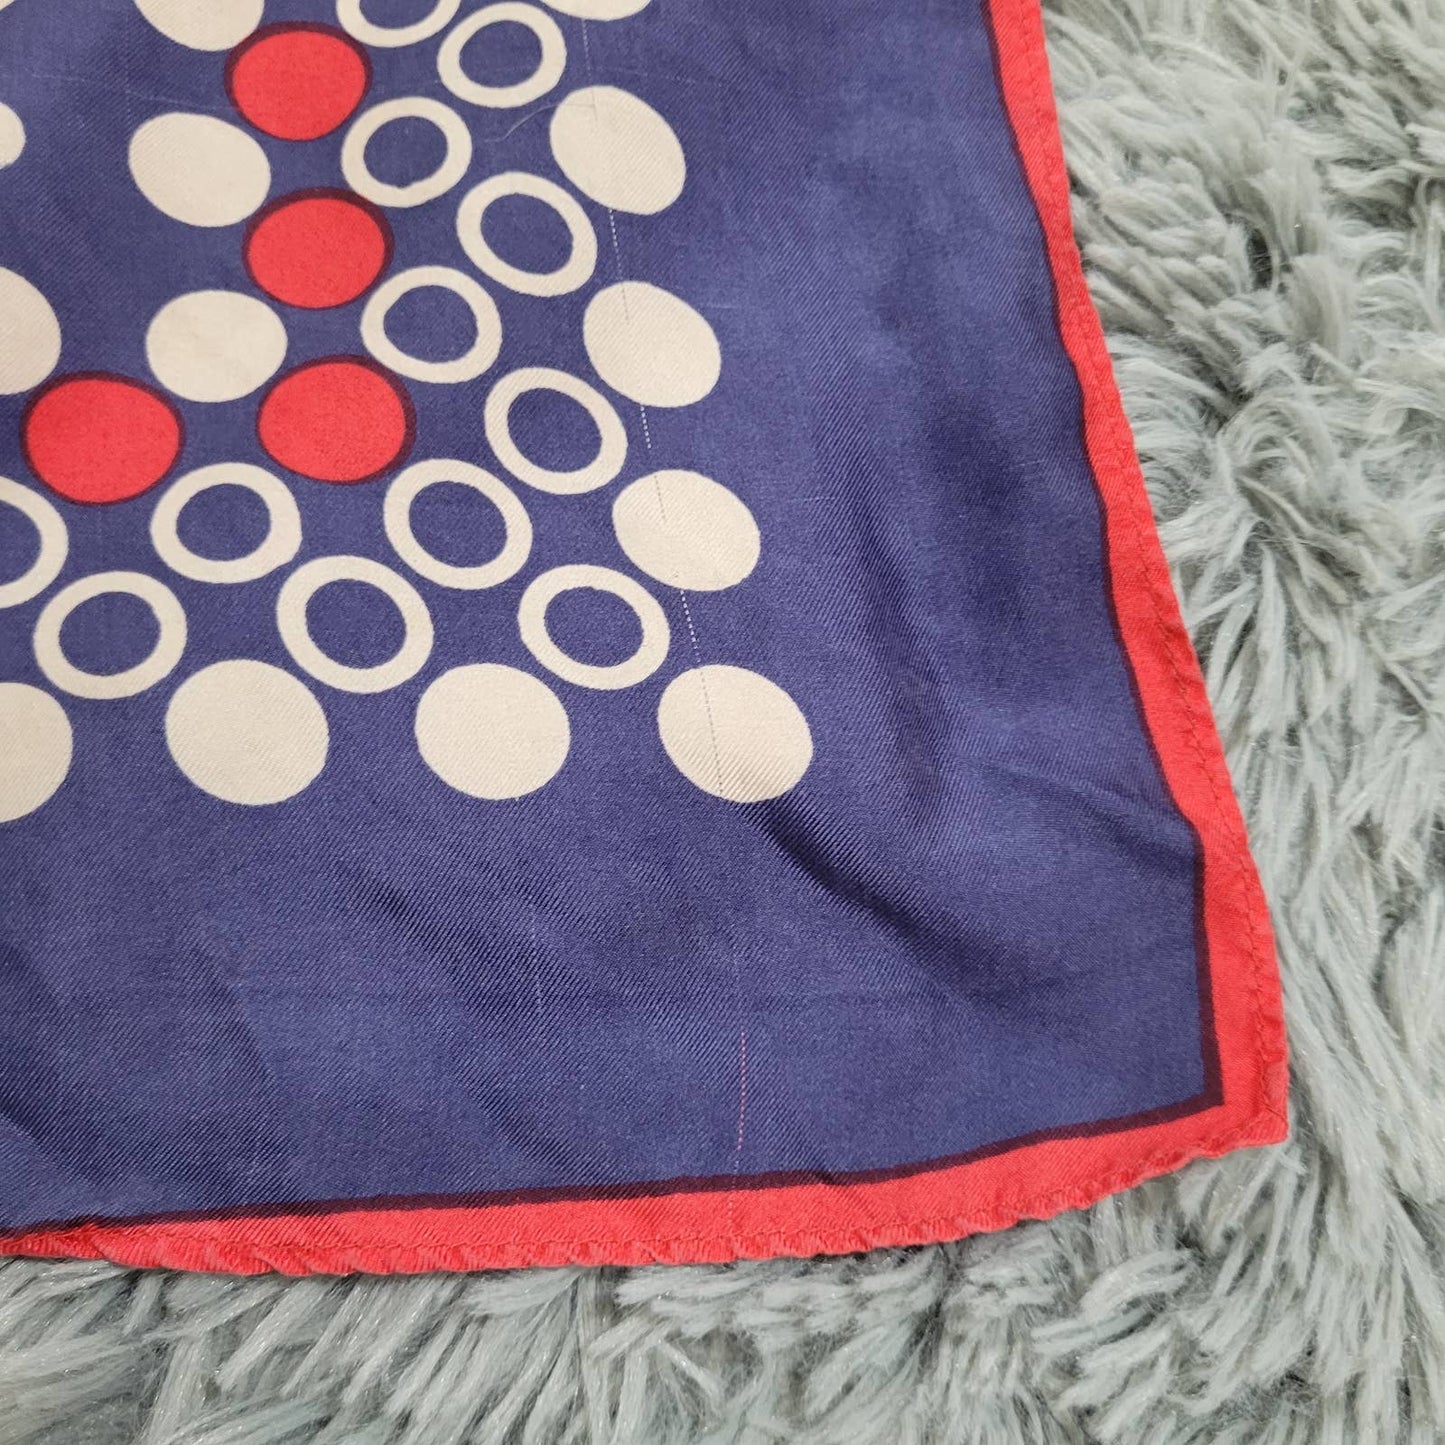 Vintage Silk Square Scarf with Polka Dots